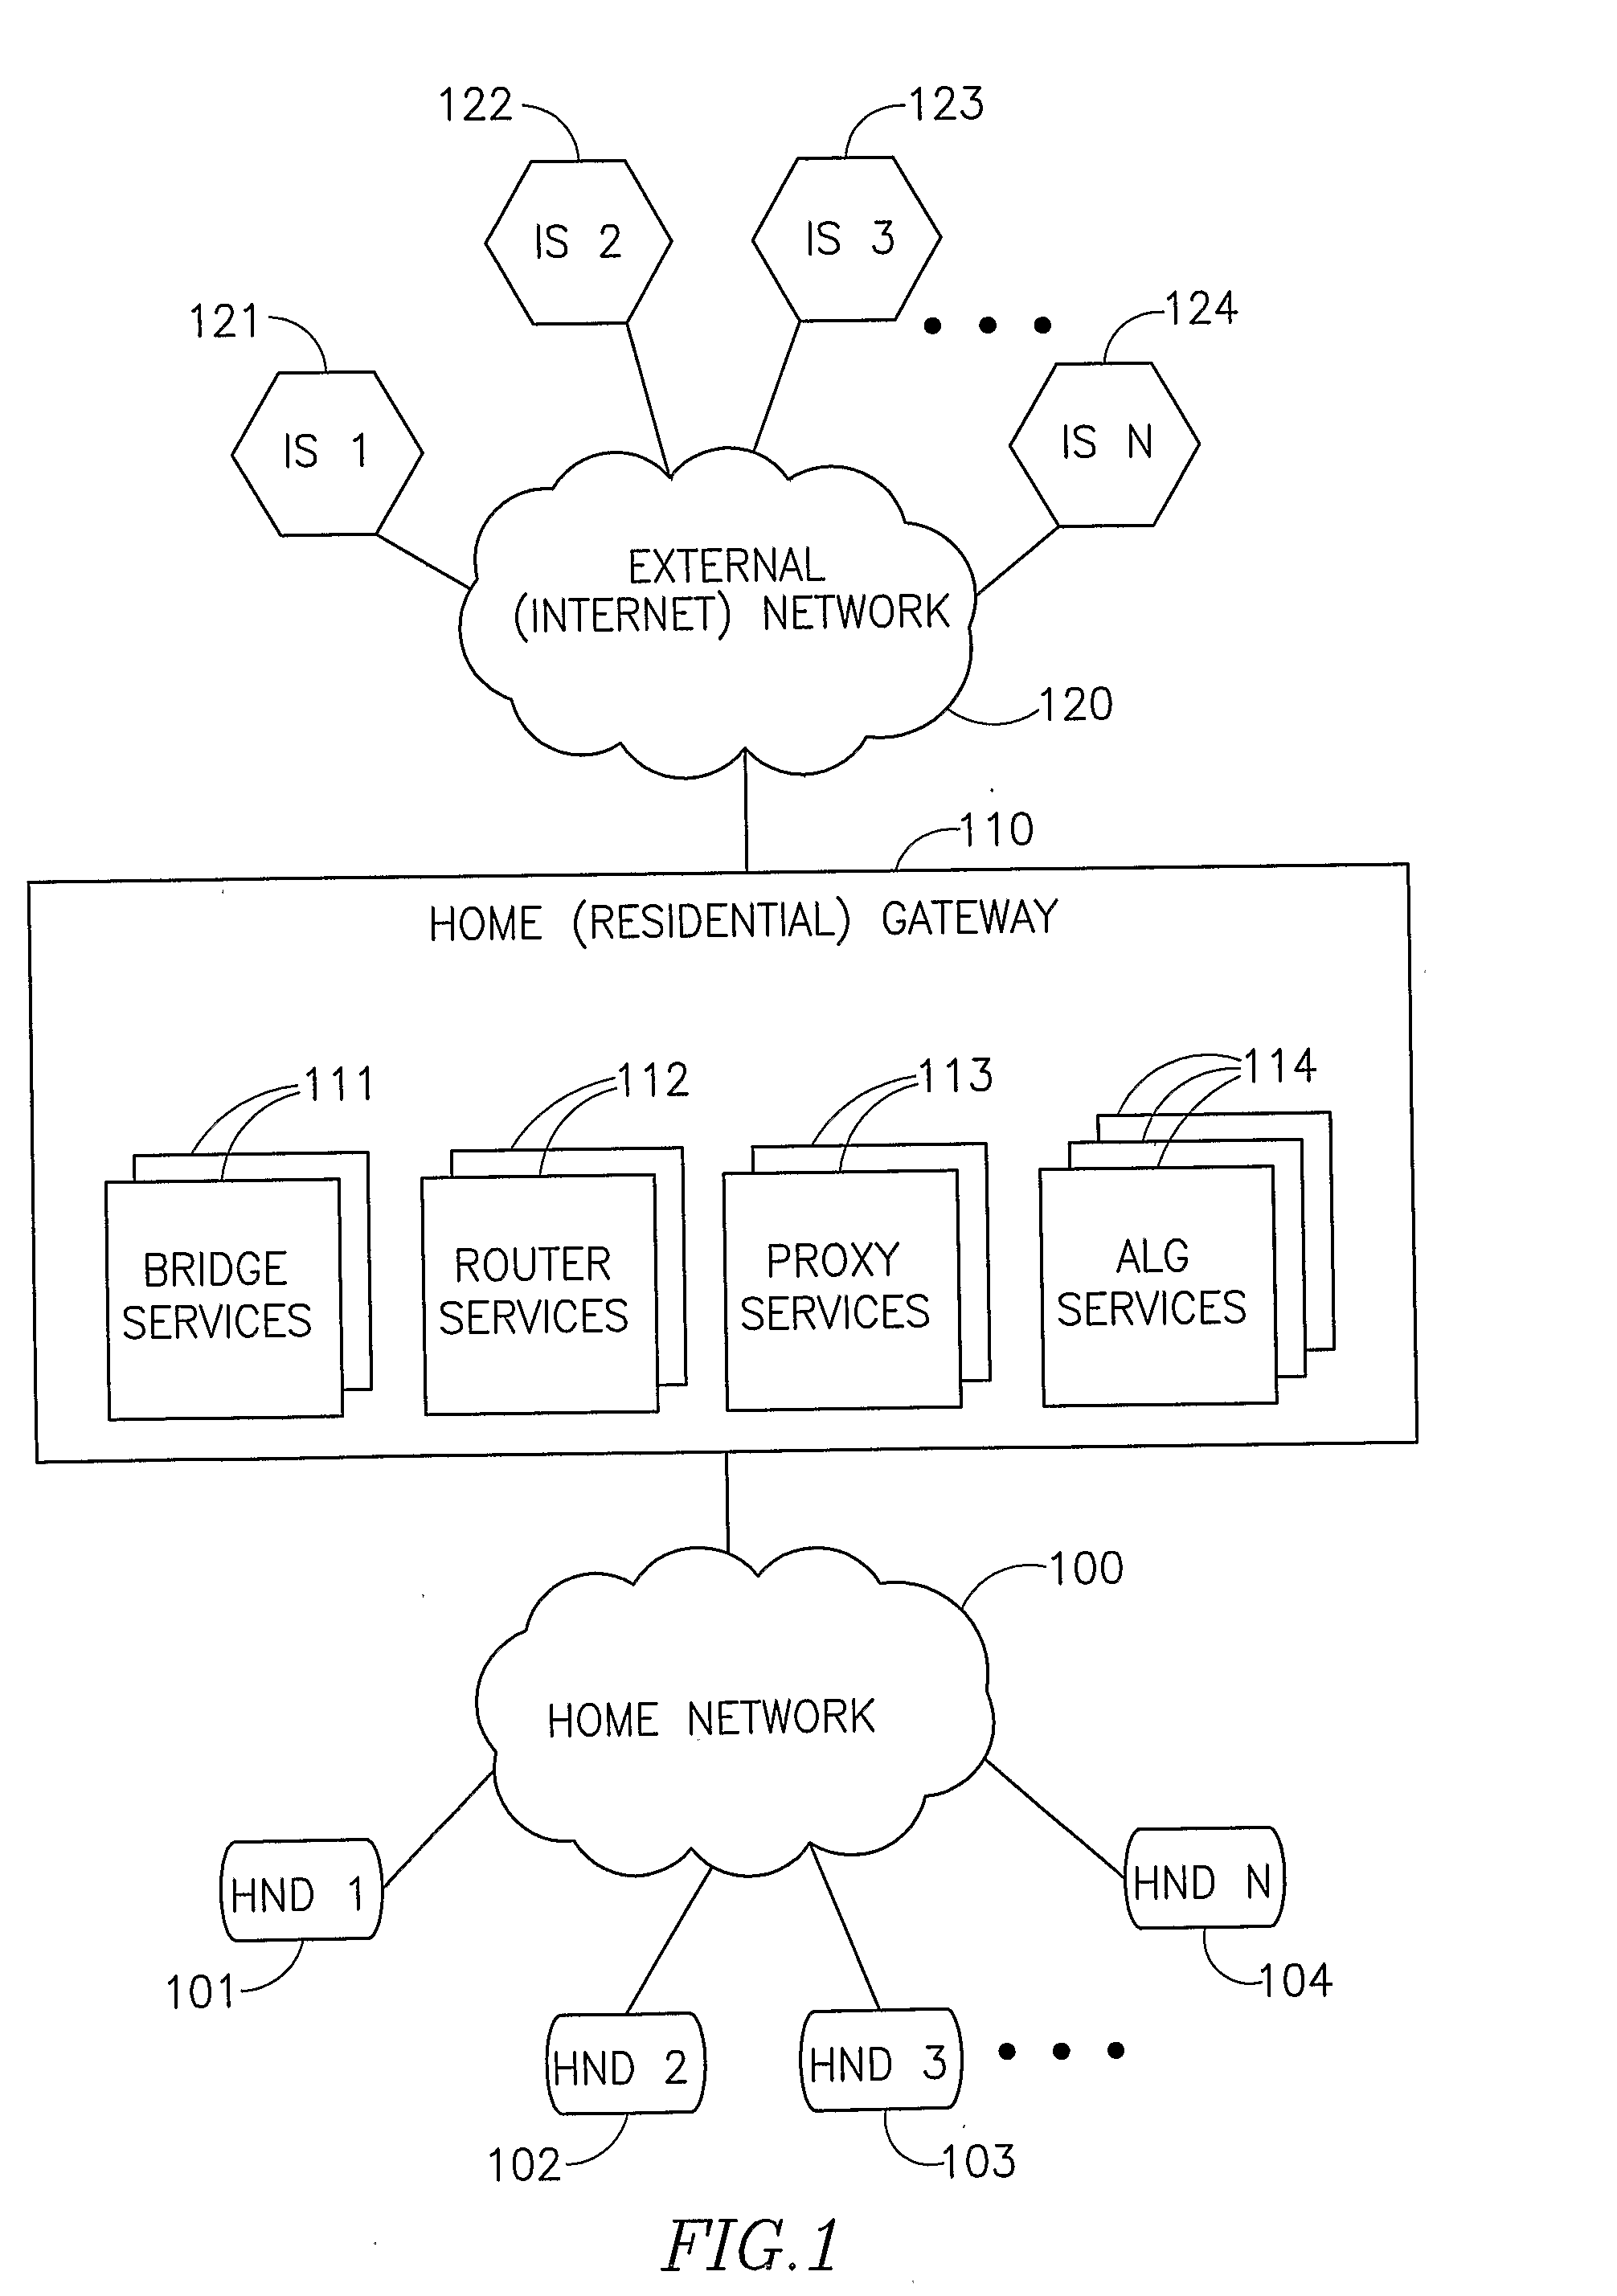 Architecture of Gateway Between a Home Network and an External Network